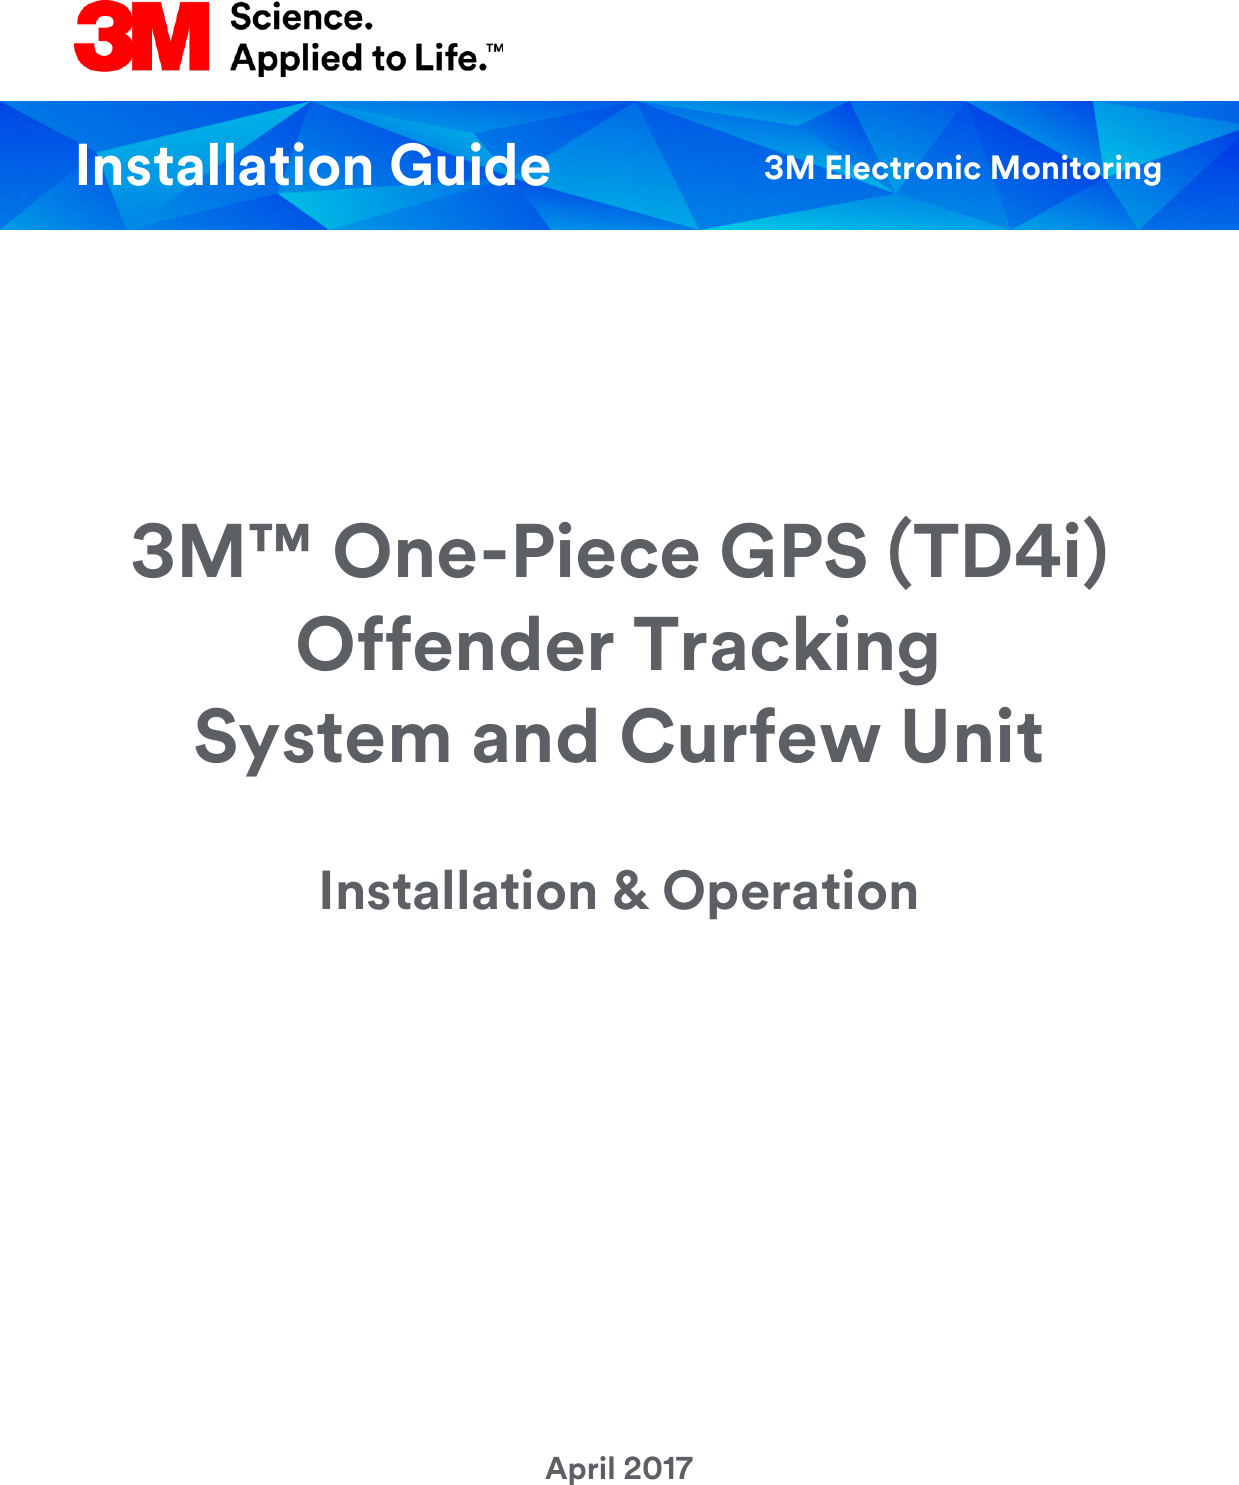   3M™ One-Piece GPS (TD4i) Offender Tracking  System and Curfew Unit Installation &amp; Operation            April 2017   Installation Guide 3M Electronic Monitoring 